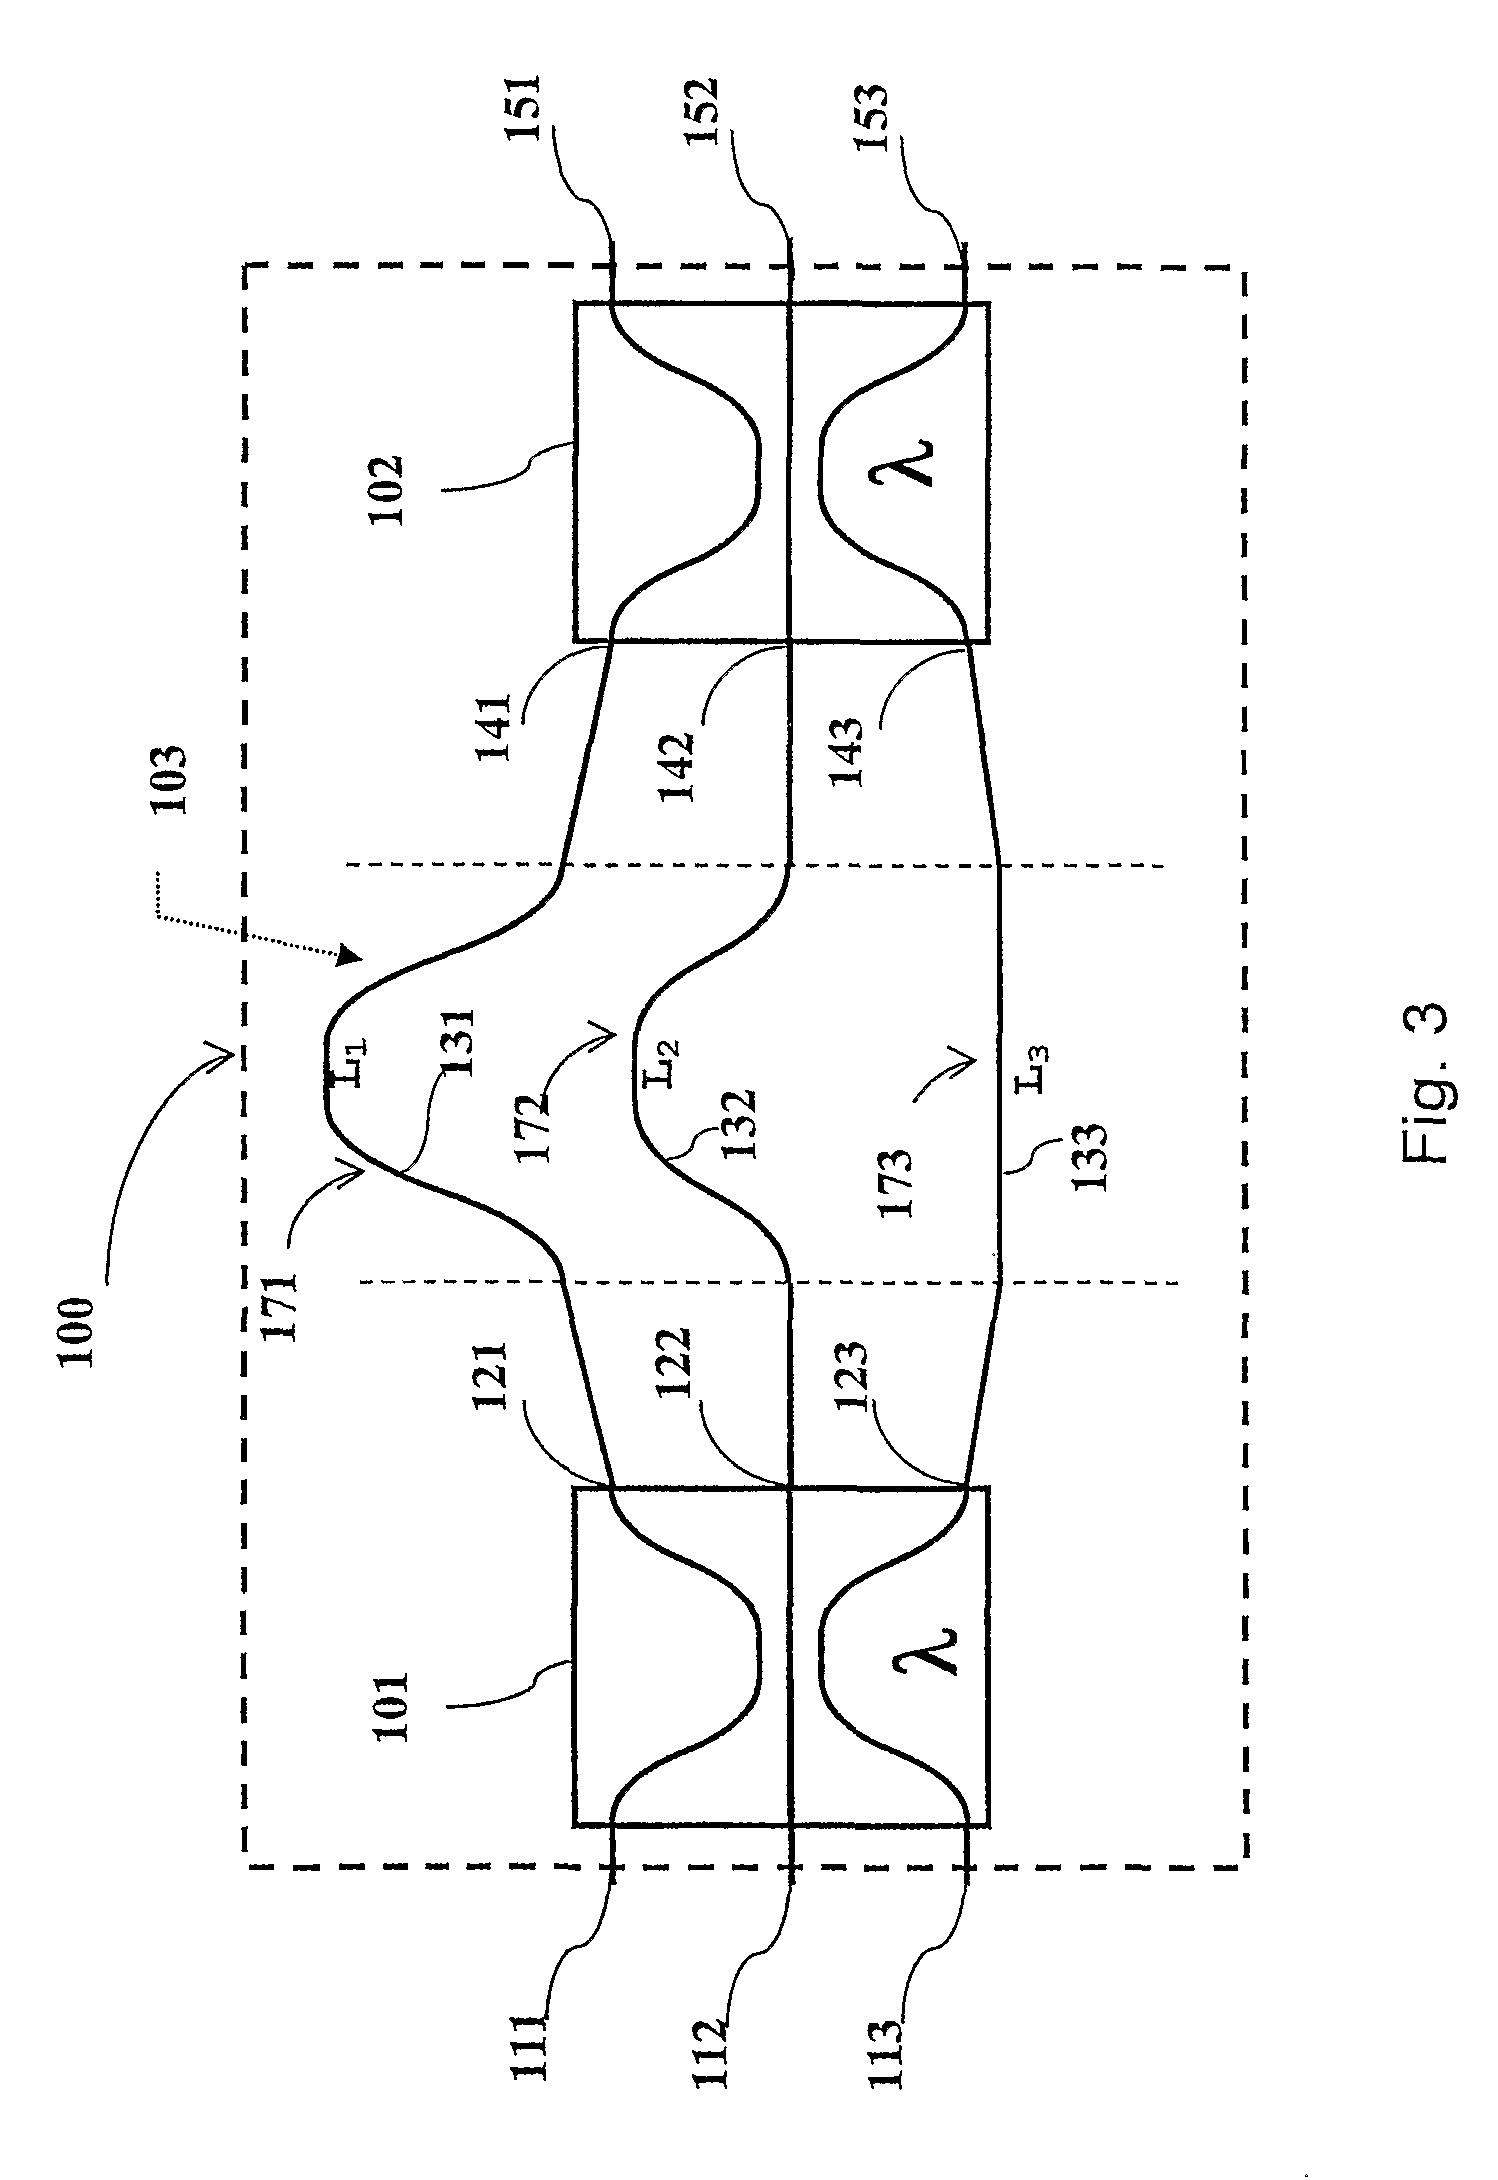 Optical band splitter/combiner device comprising a three-arms interferometer